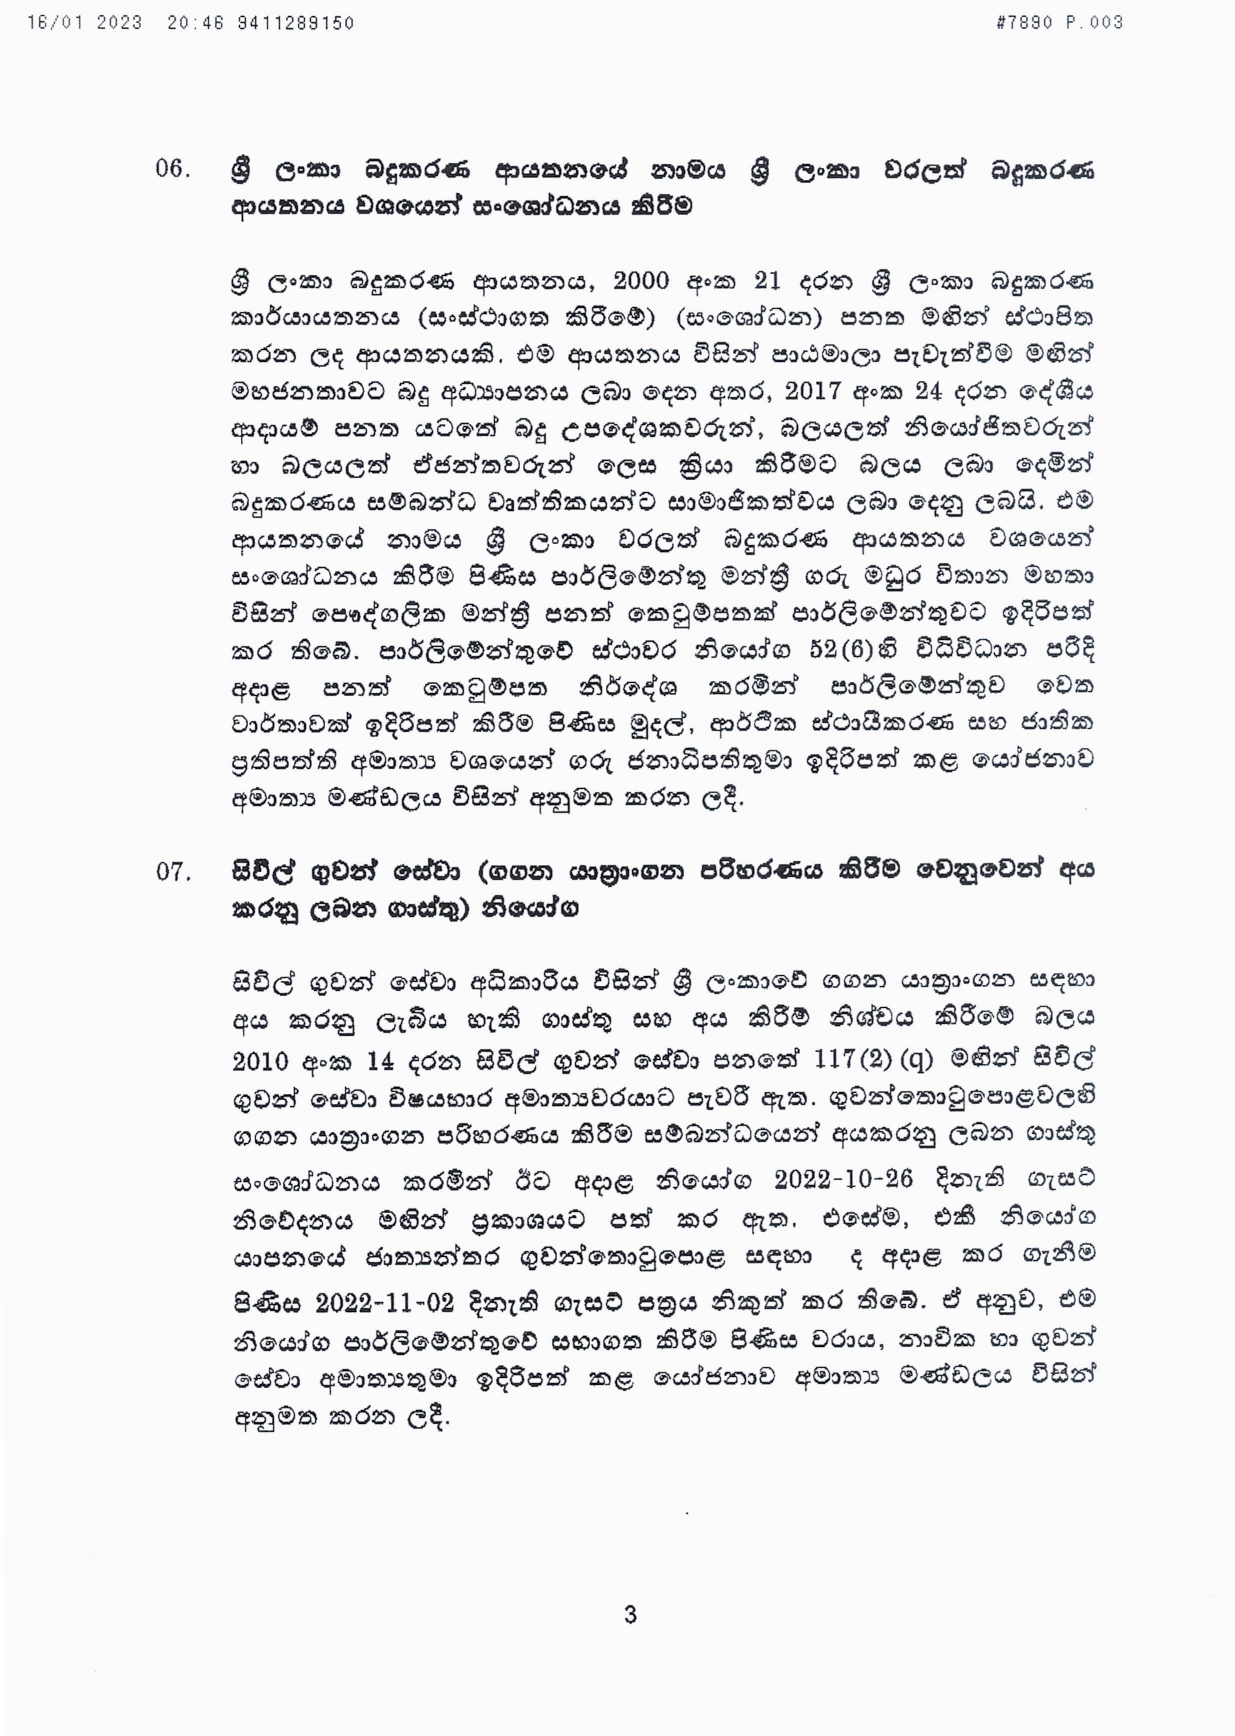 Cabinet Decision on 16.01.2023 page 0003